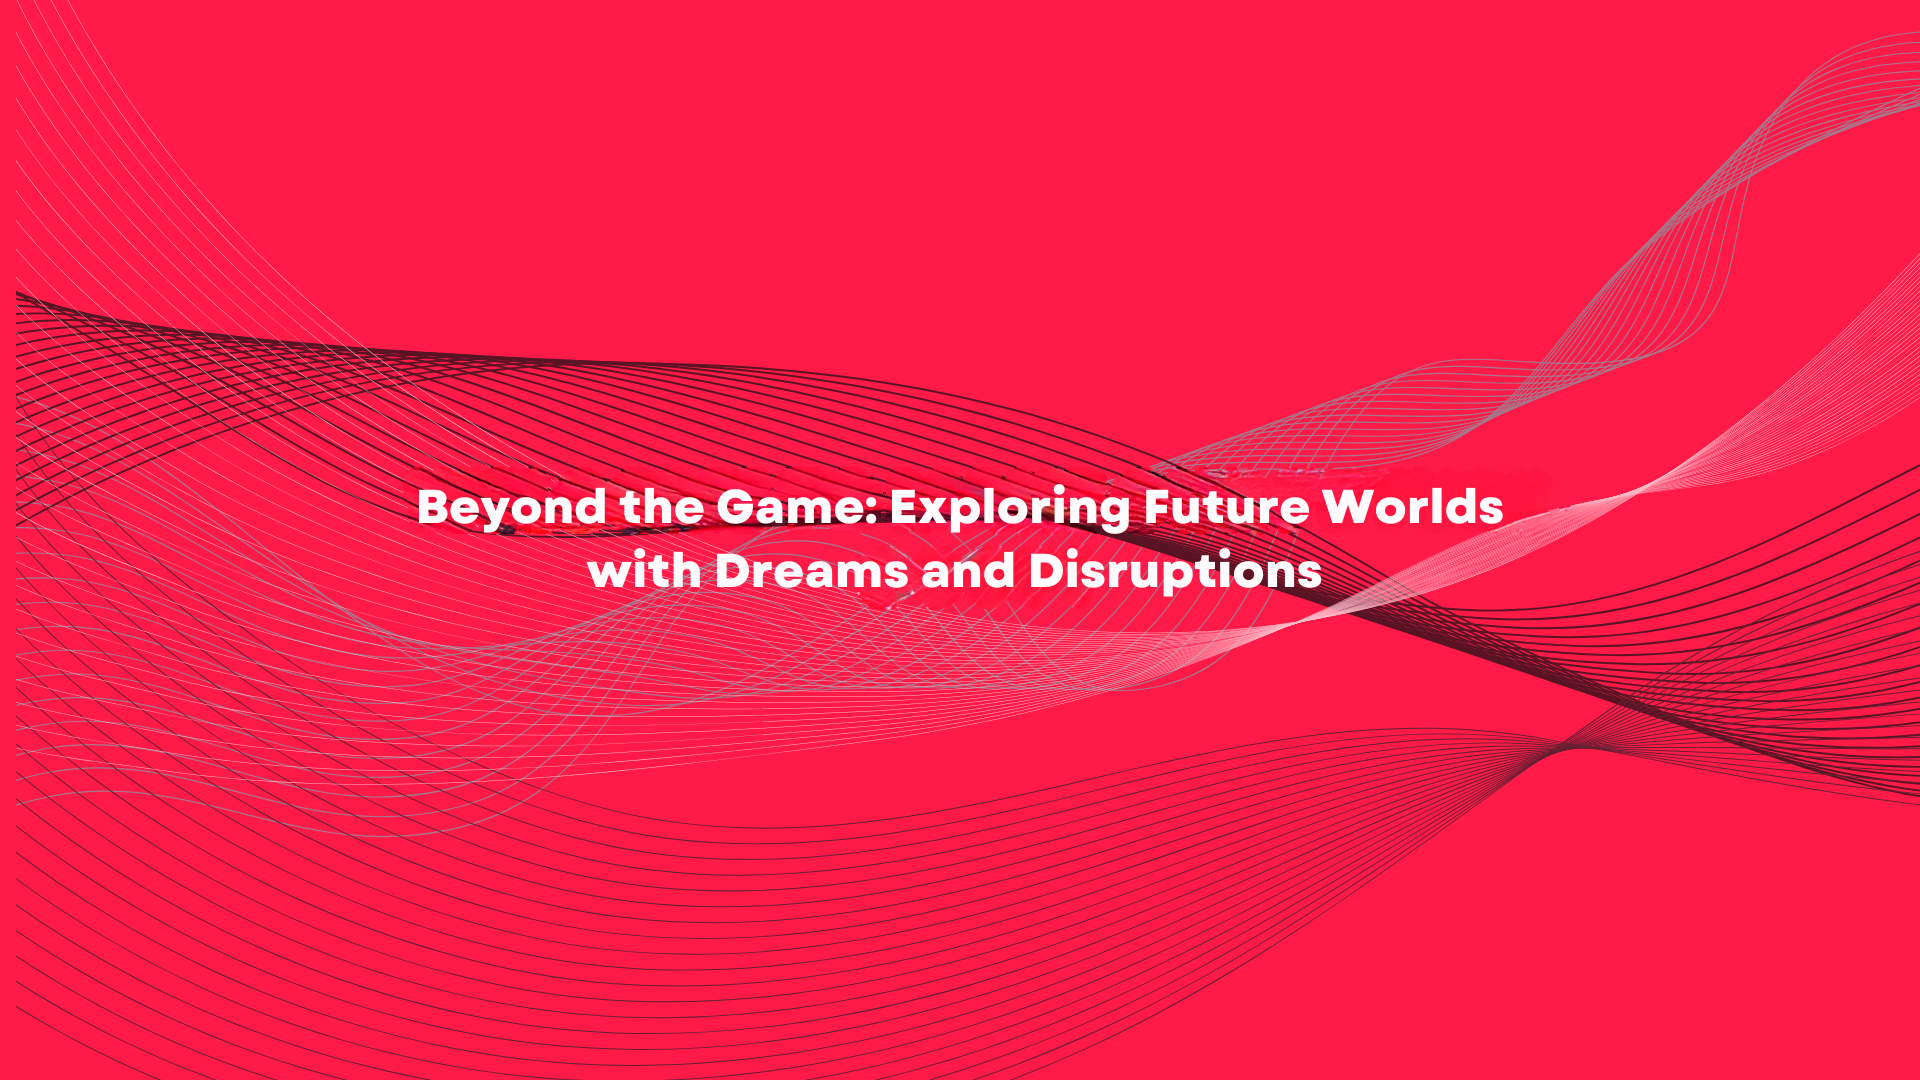 Beyond the Game: Exploring Future Worlds with Dreams and Disruptions